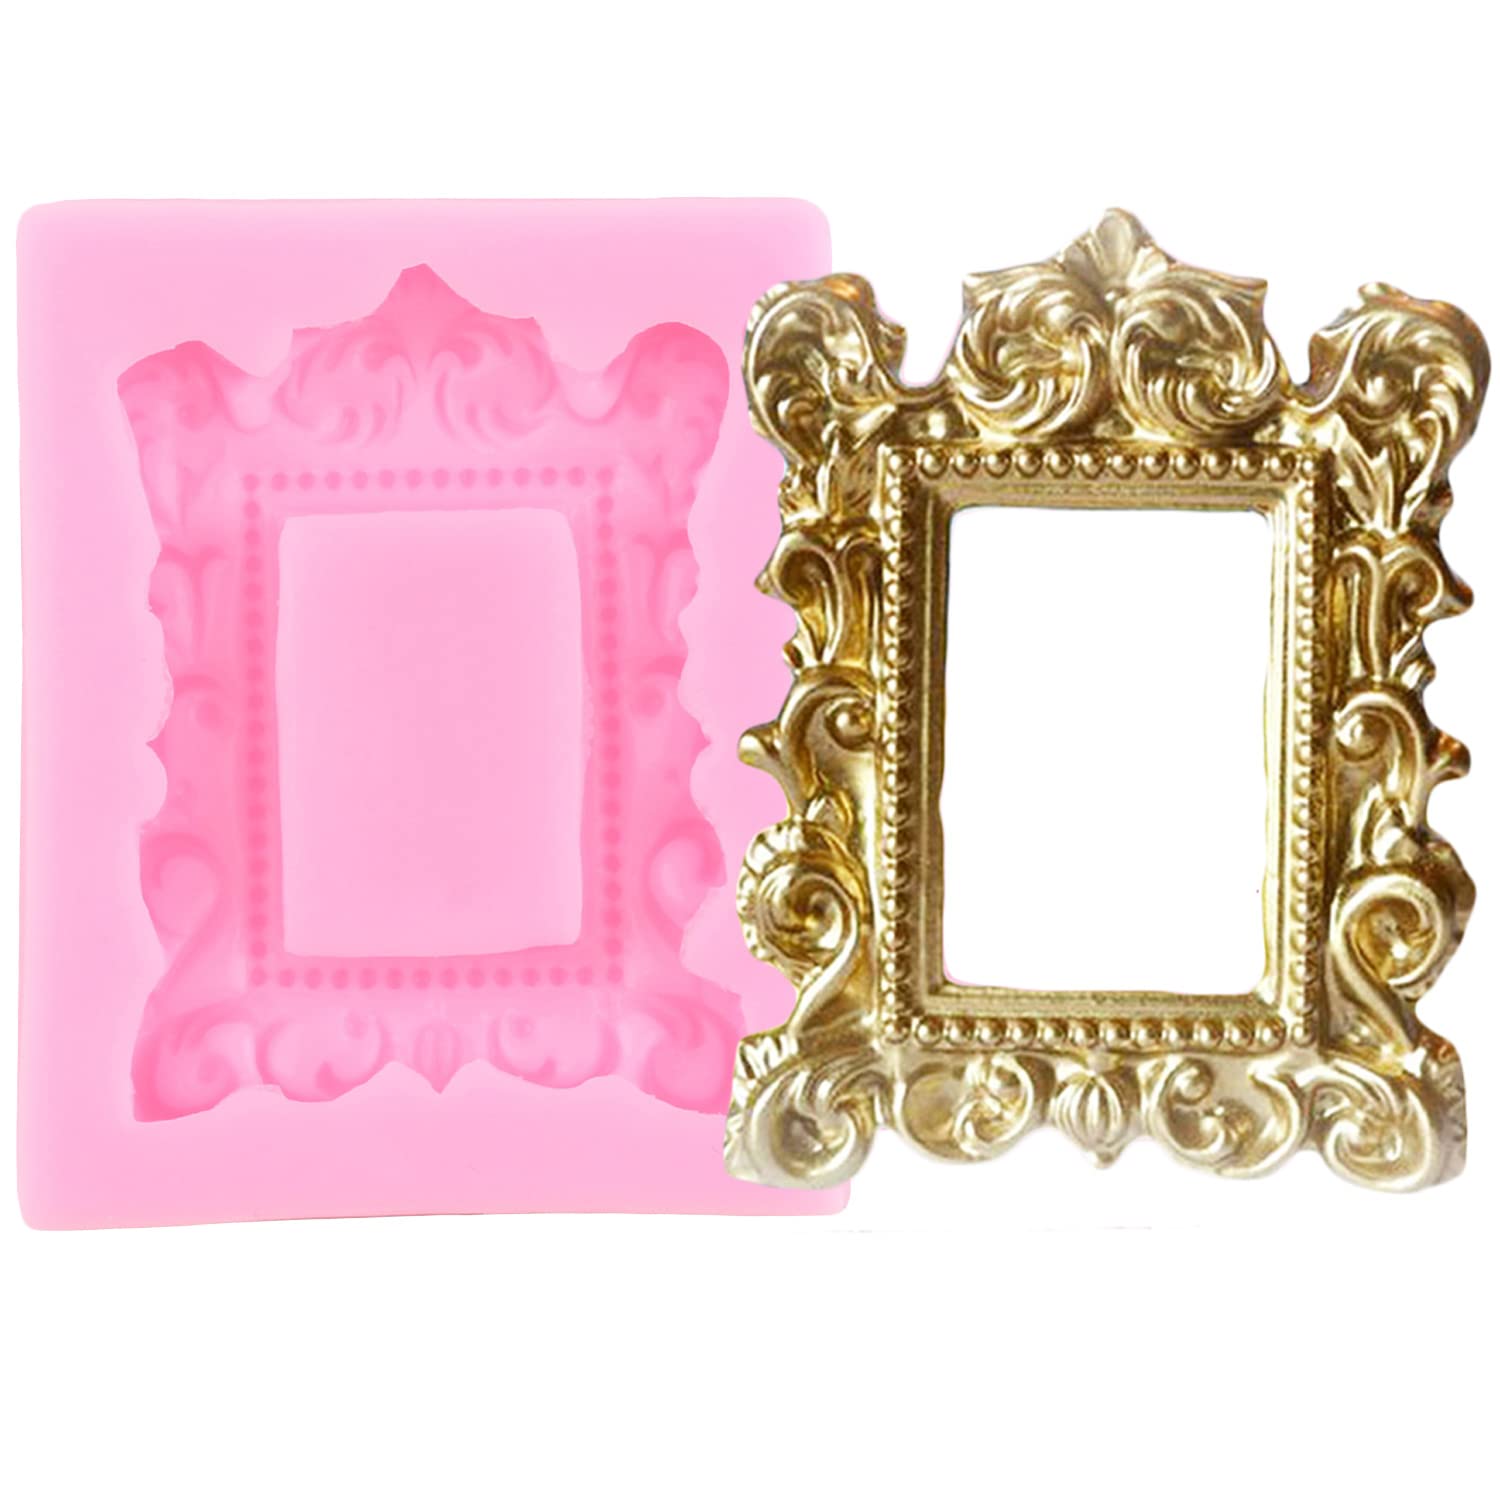 ZiXiang Photo Frame Silicone Molds Baroque Style Picture Frames Fondant Mold For Cupcake Topper Cake Decoration Chocolate Candy Polymer Clay Gum Paste Set Of 4